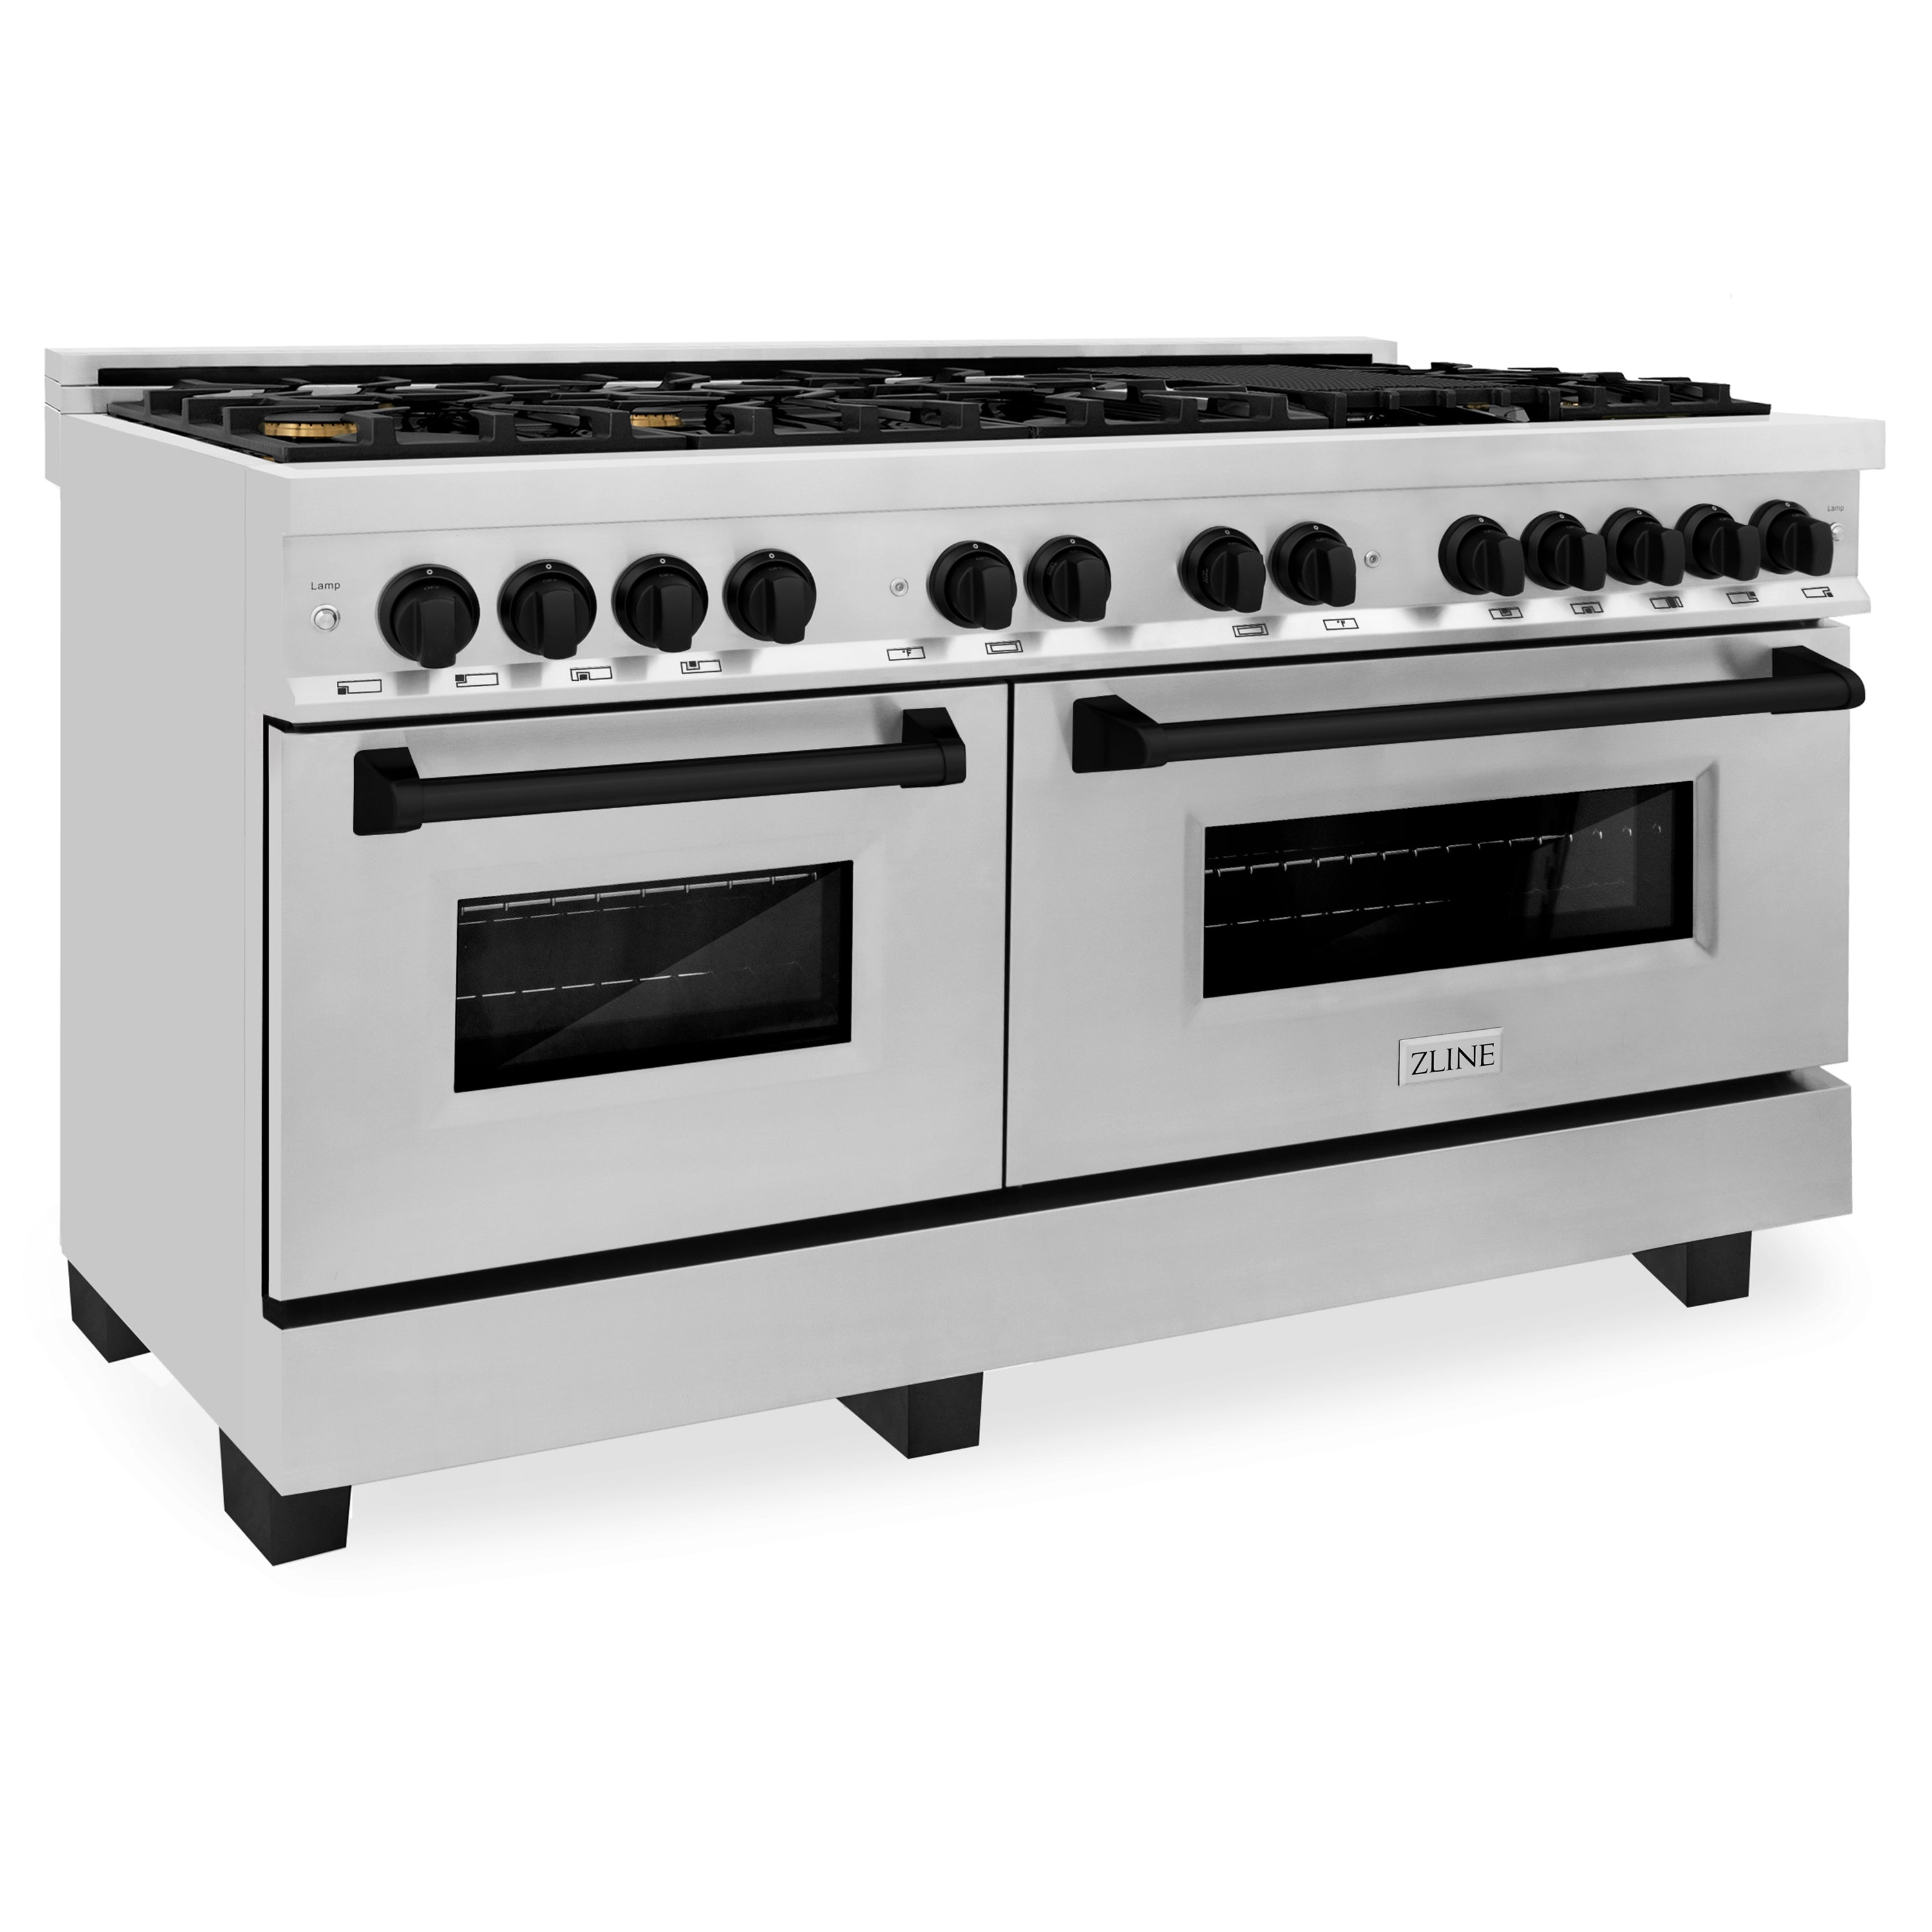 ZLINE Autograph Edition 60" 7.4 cu. ft. Dual Fuel Range with Gas Stove and Electric Oven in Stainless Steel with Accents (RAZ-60-MB)